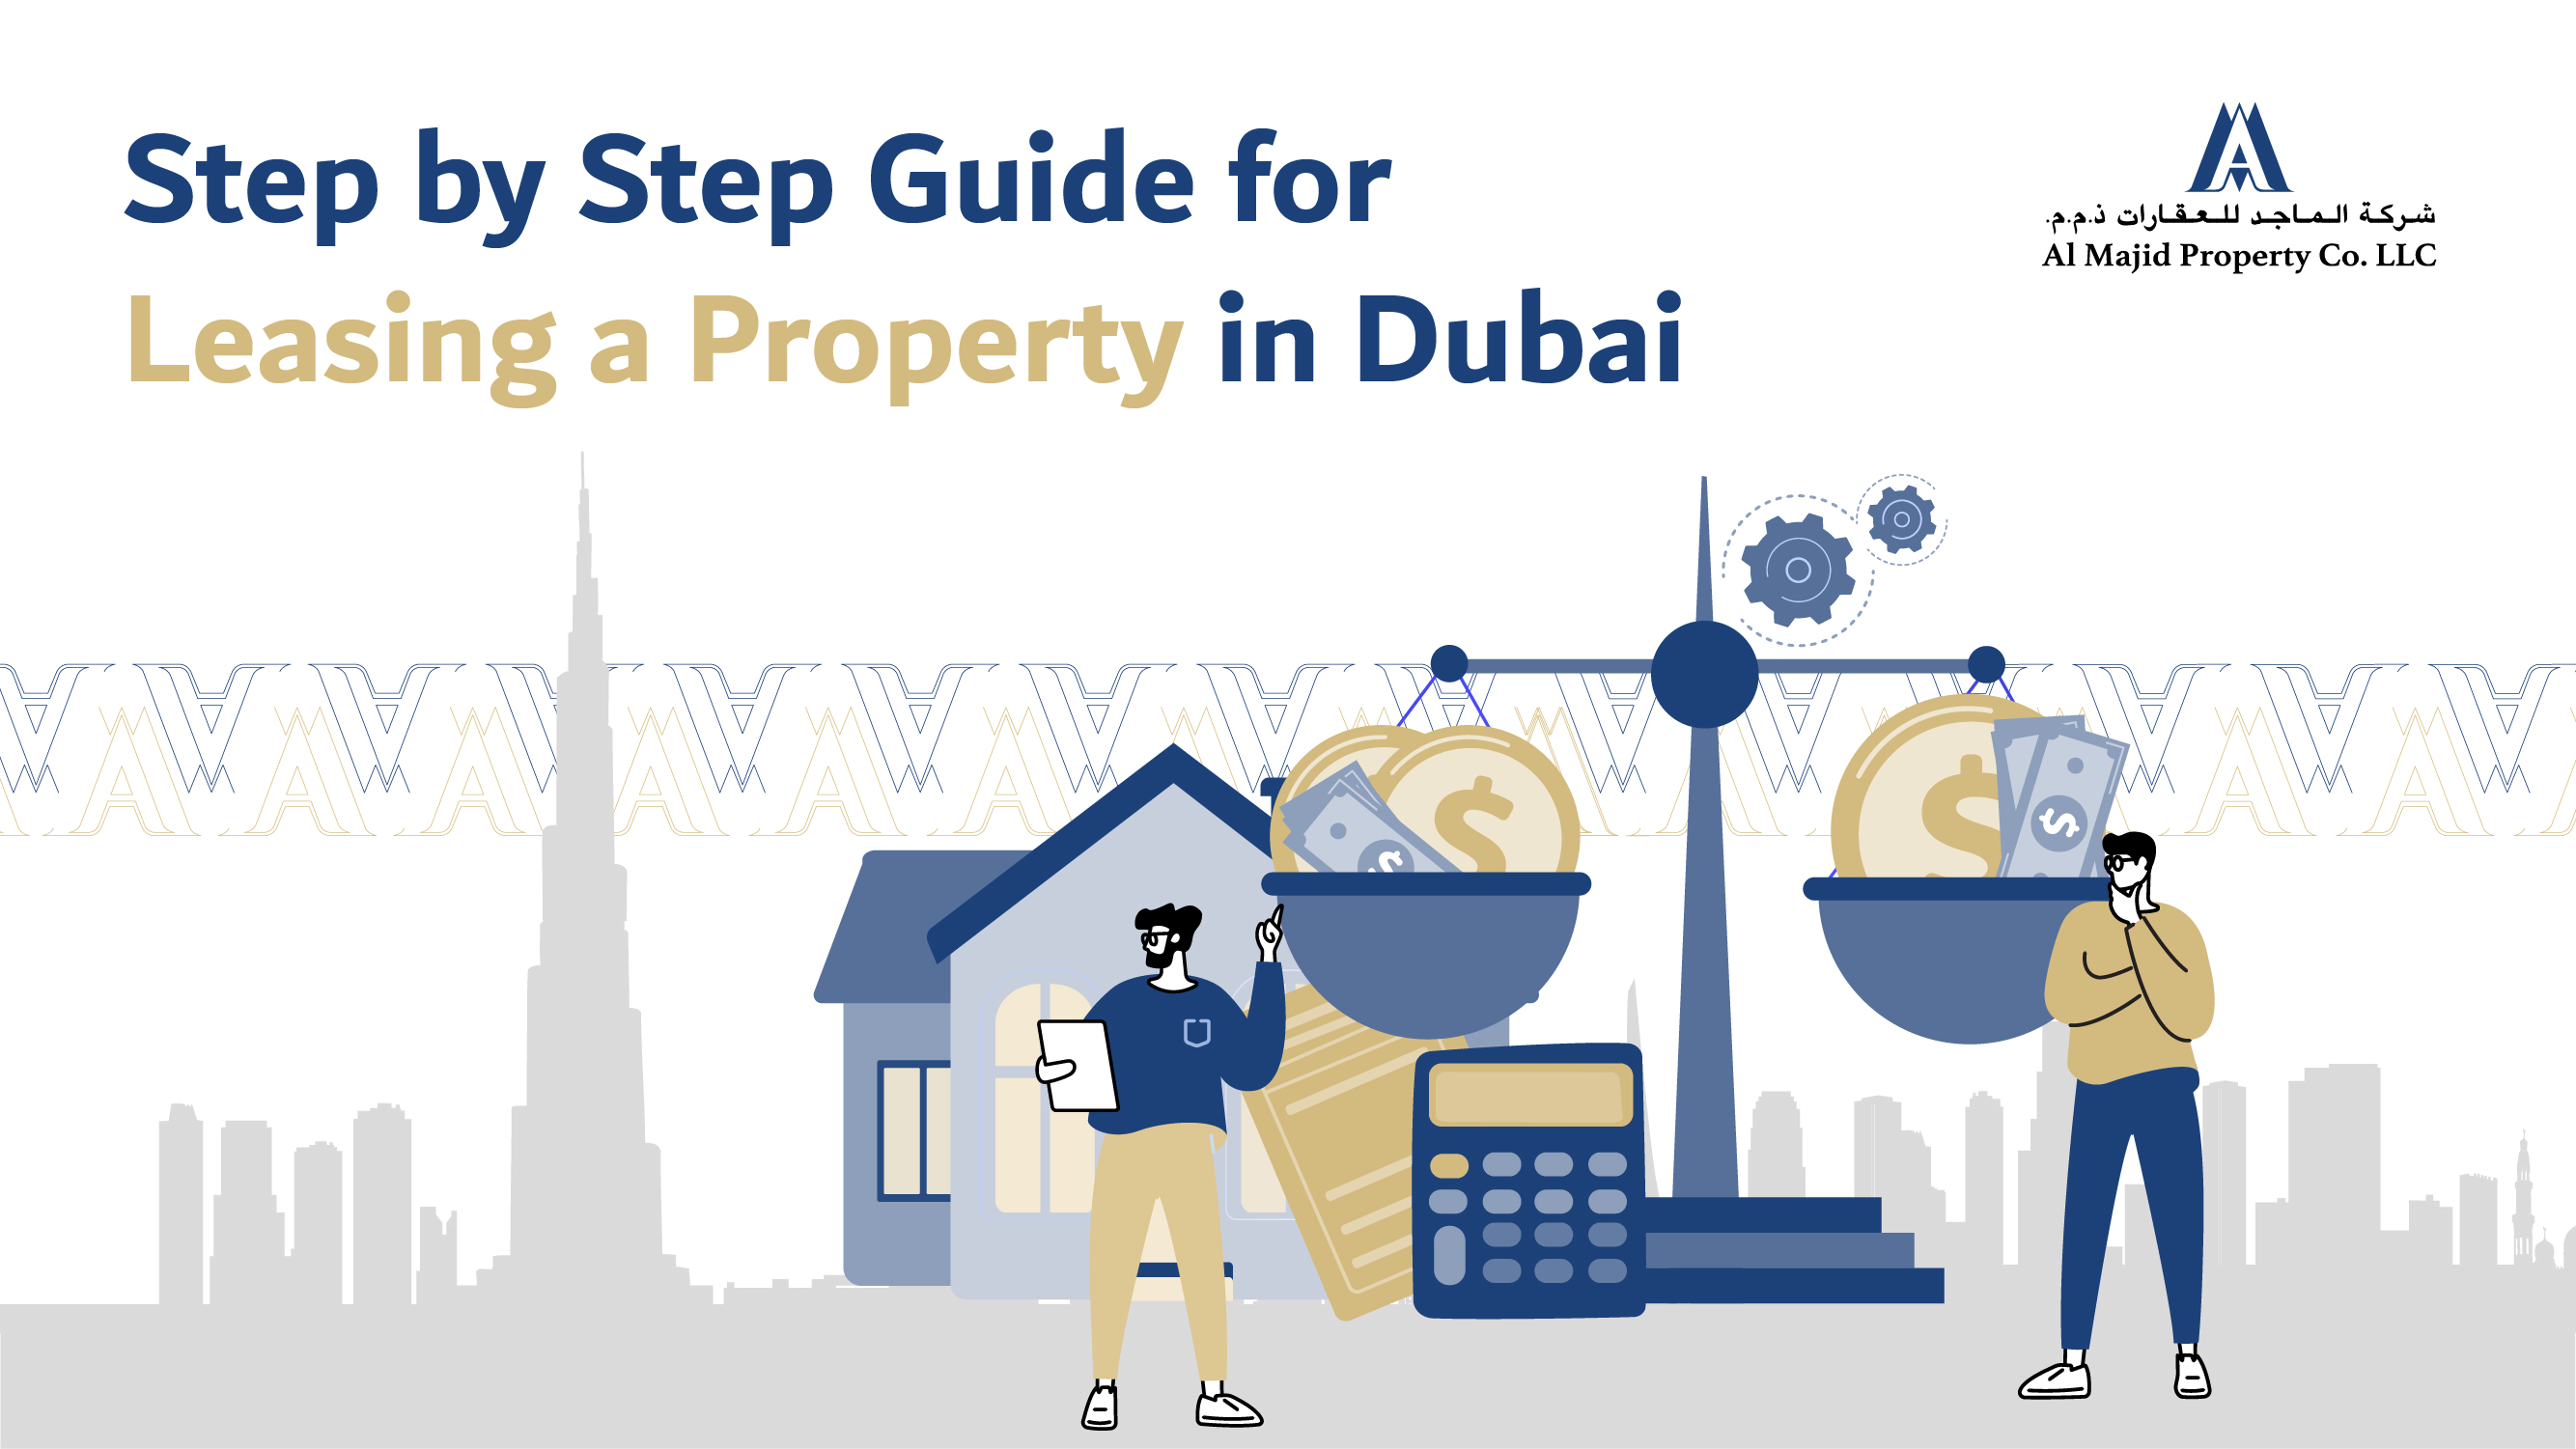 Step by Step Guide for Leasing a Property in Dubai